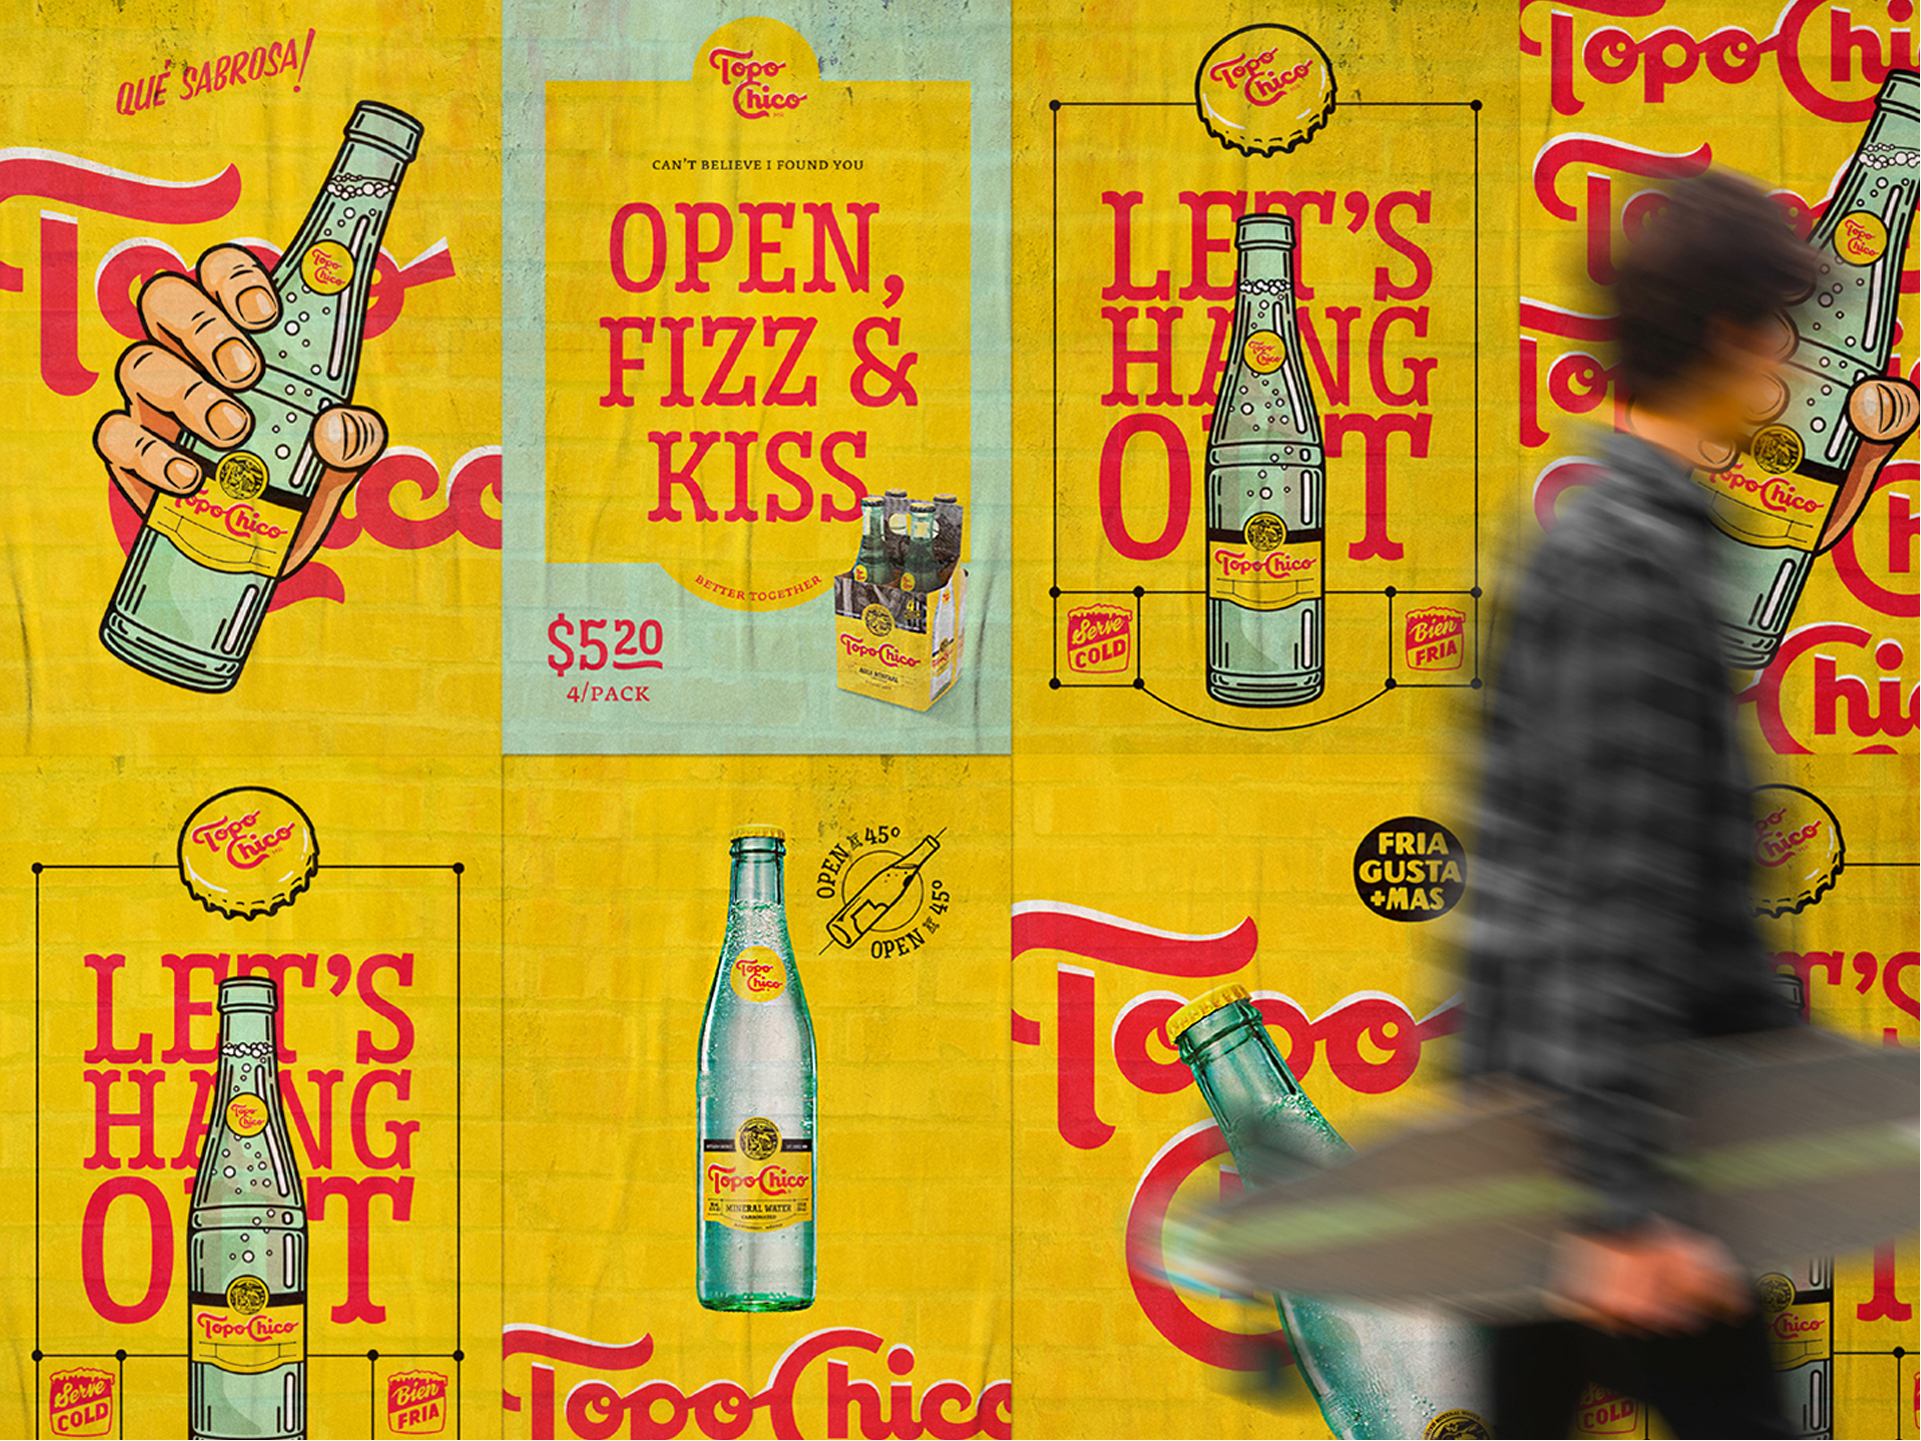 Topo Chico: Source of Discovery